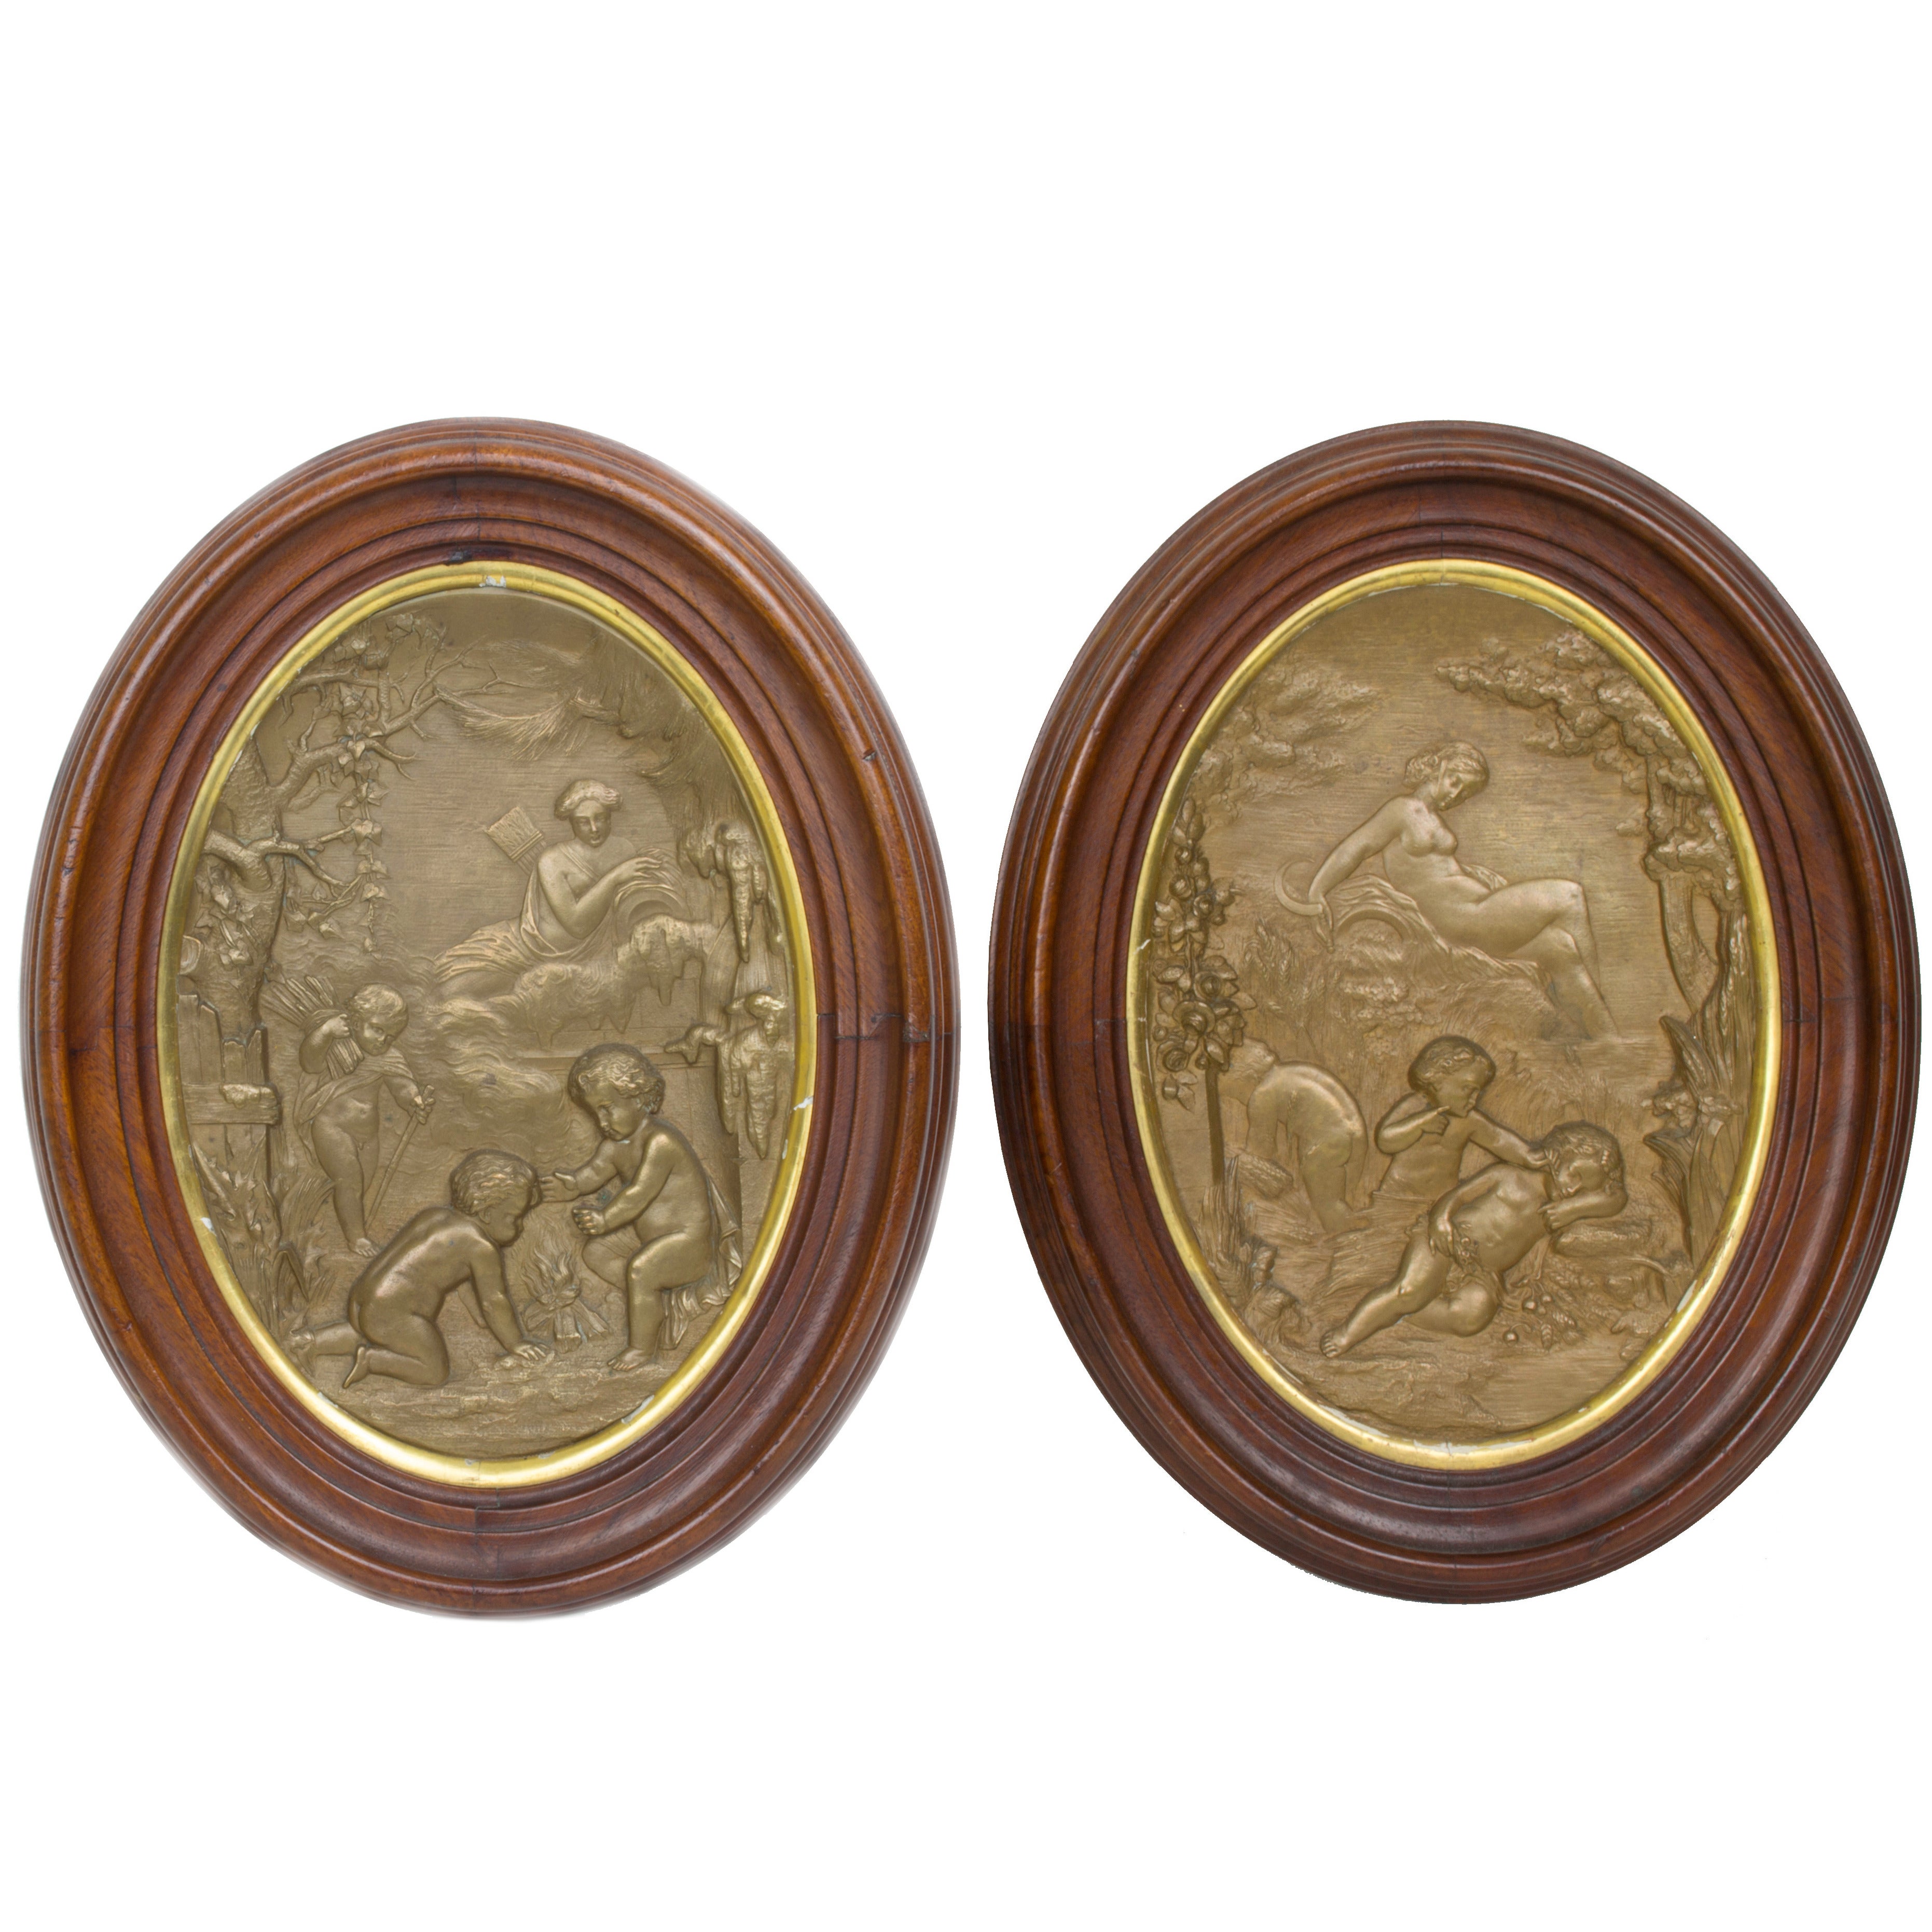 Pair of Oval Patinated Metal Wall Plaques with Cherub Decorations For Sale